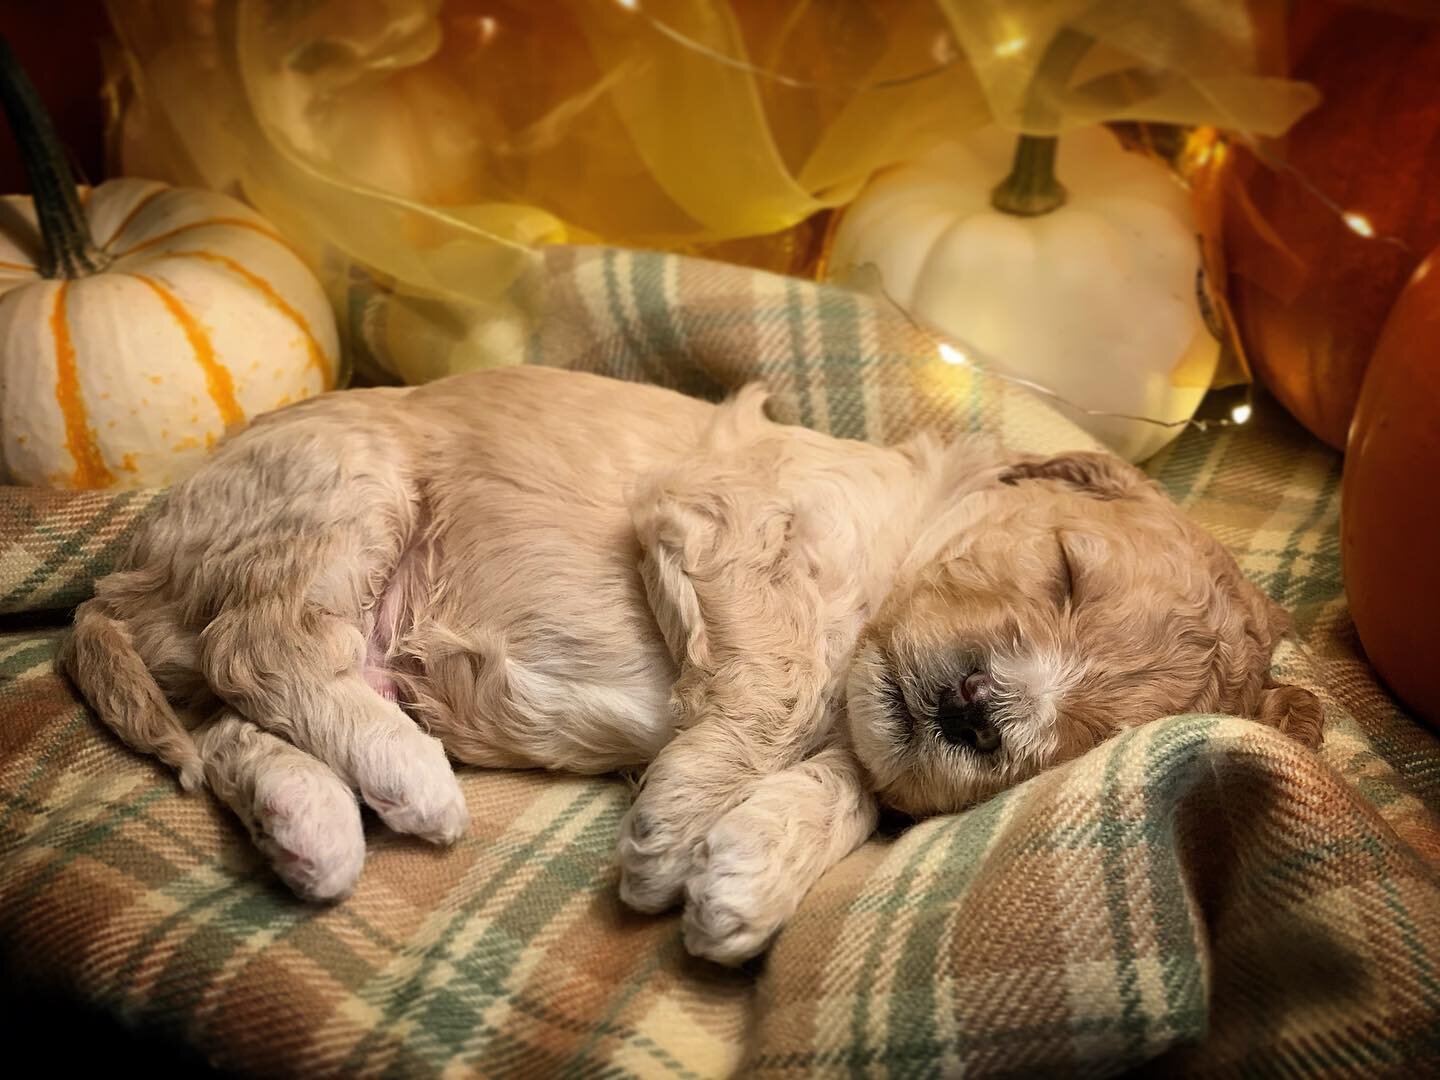 🤍Puppy Update on &ldquo;Gravy&rdquo; from Kona&rsquo;s 2020 litter. He was the biggest boy in the litter and such a friendly puppy! He&rsquo;s now Percy (@percival.the.cockapoo ) and loving life near Charlottesville, VA. Here&rsquo;s a bit from his 